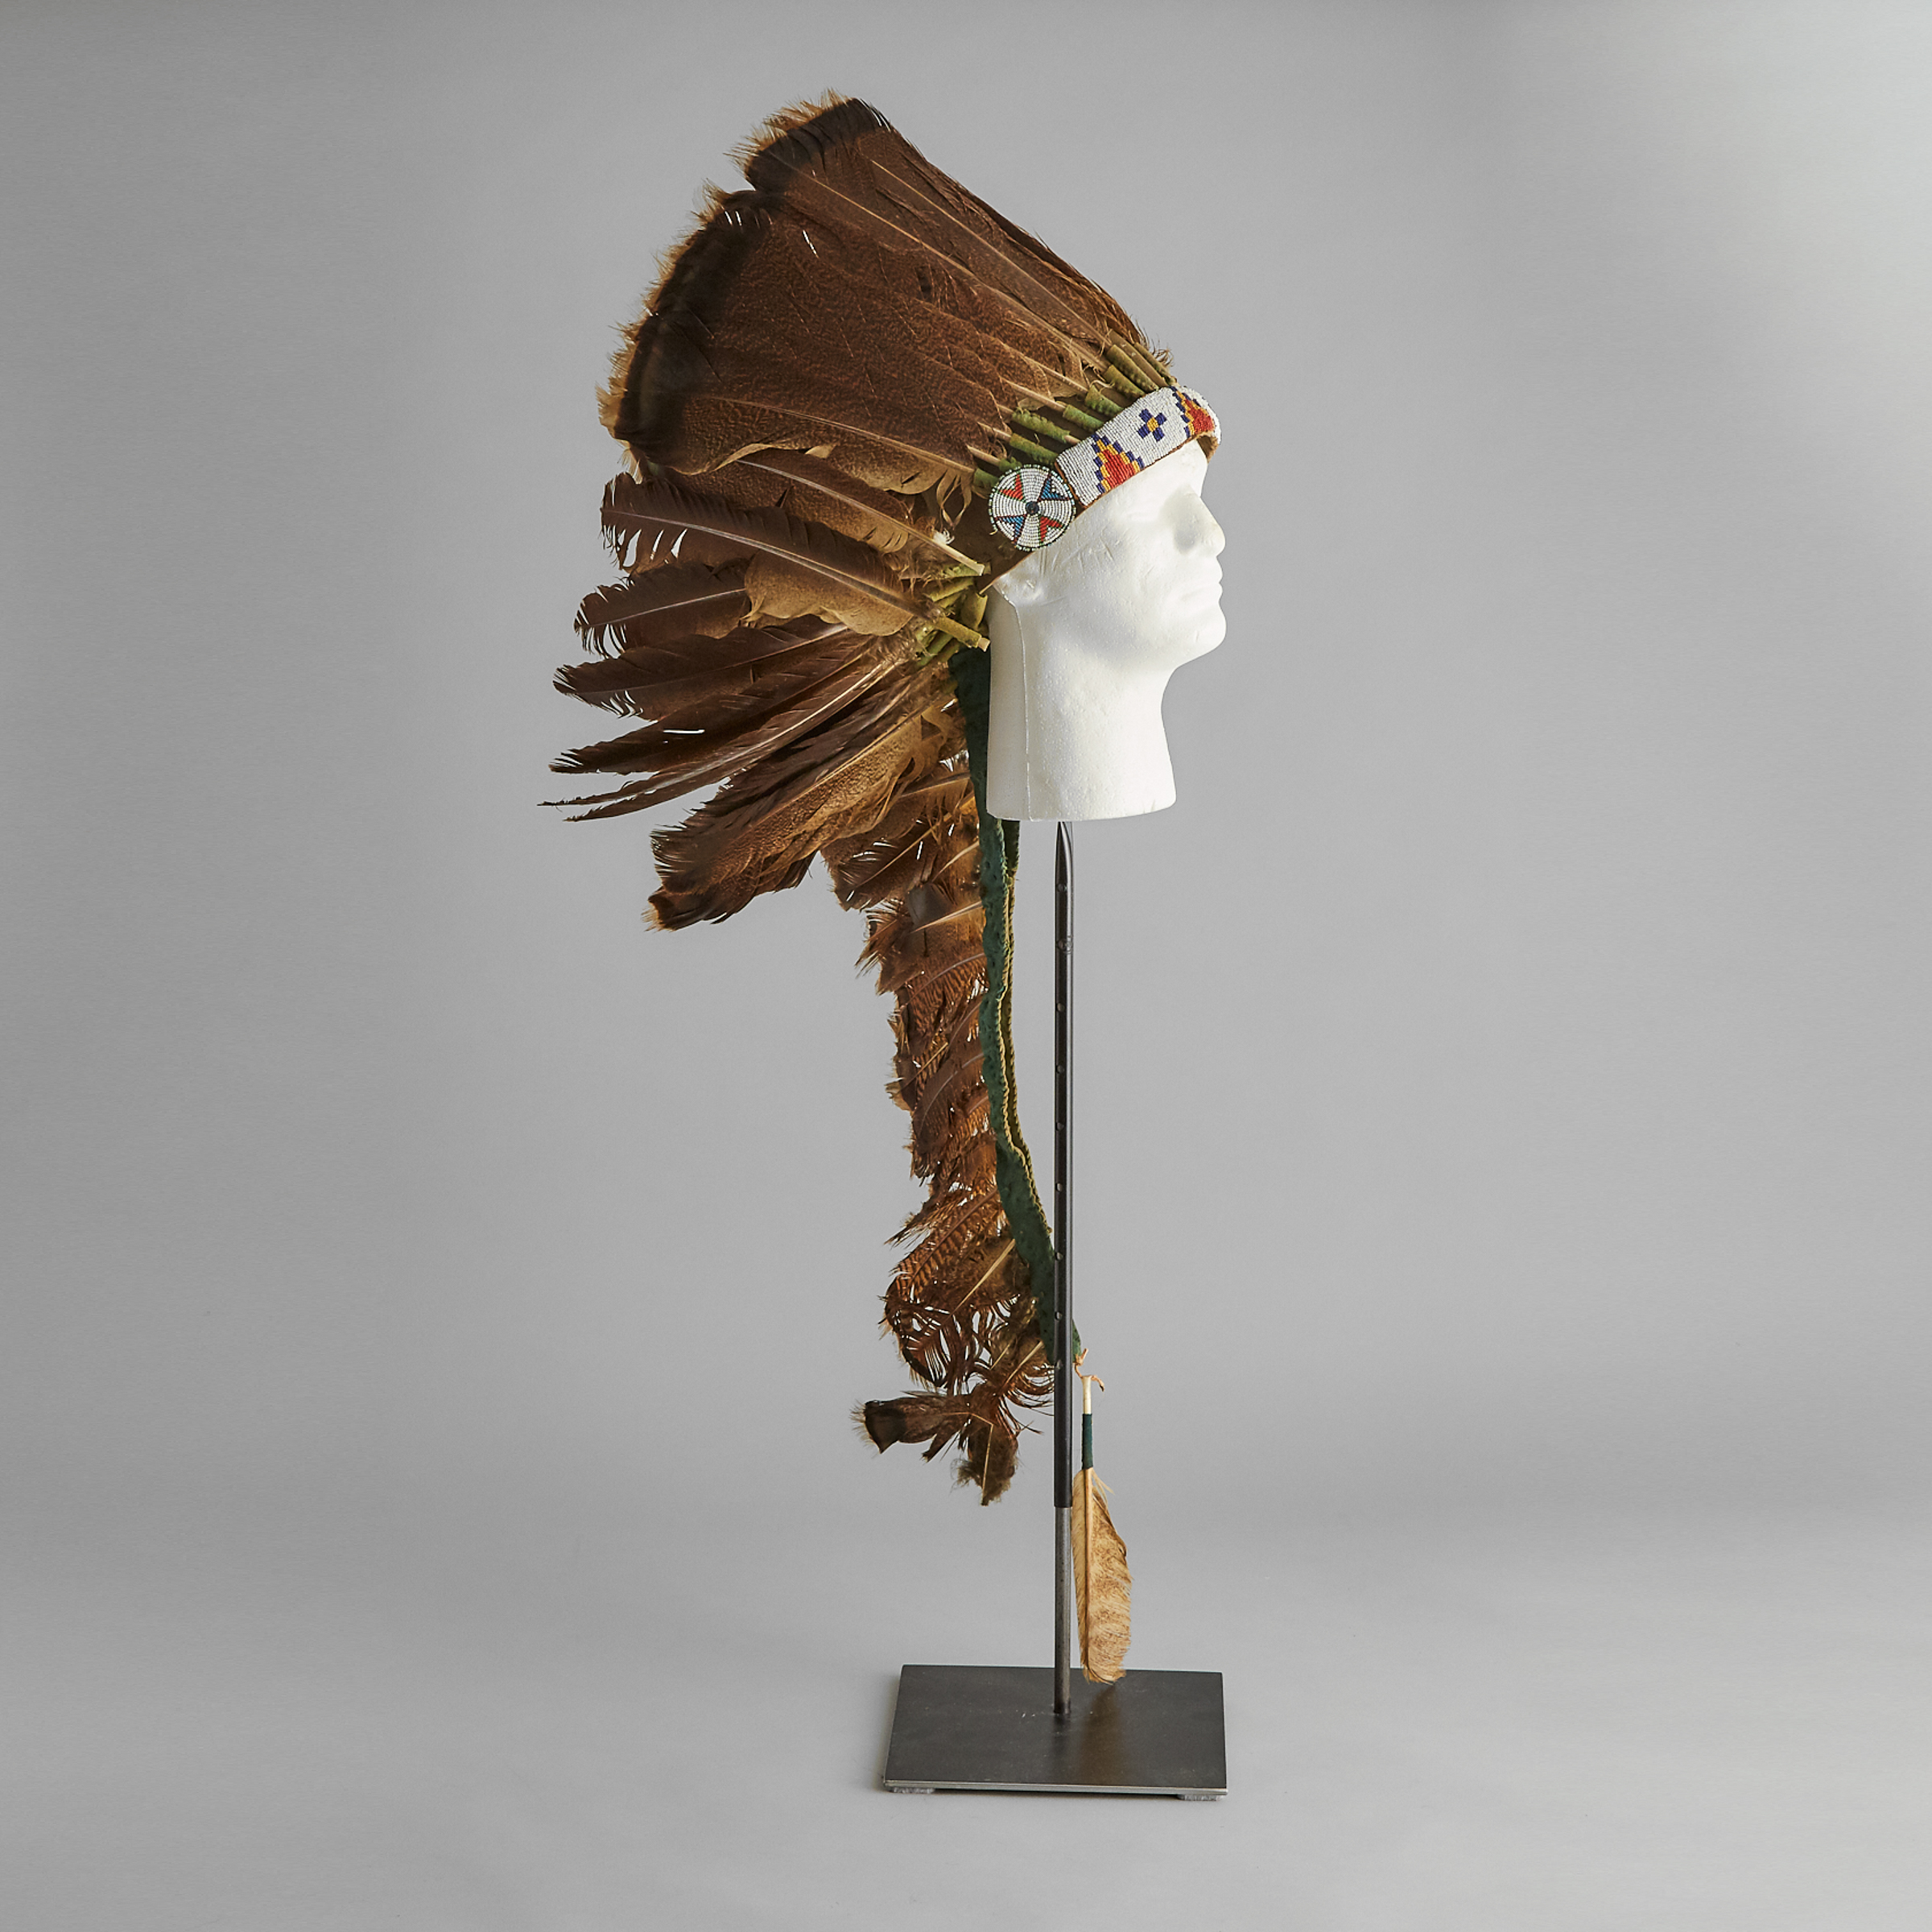 Plains Indian Headdress or Warbonnet, early 20th century